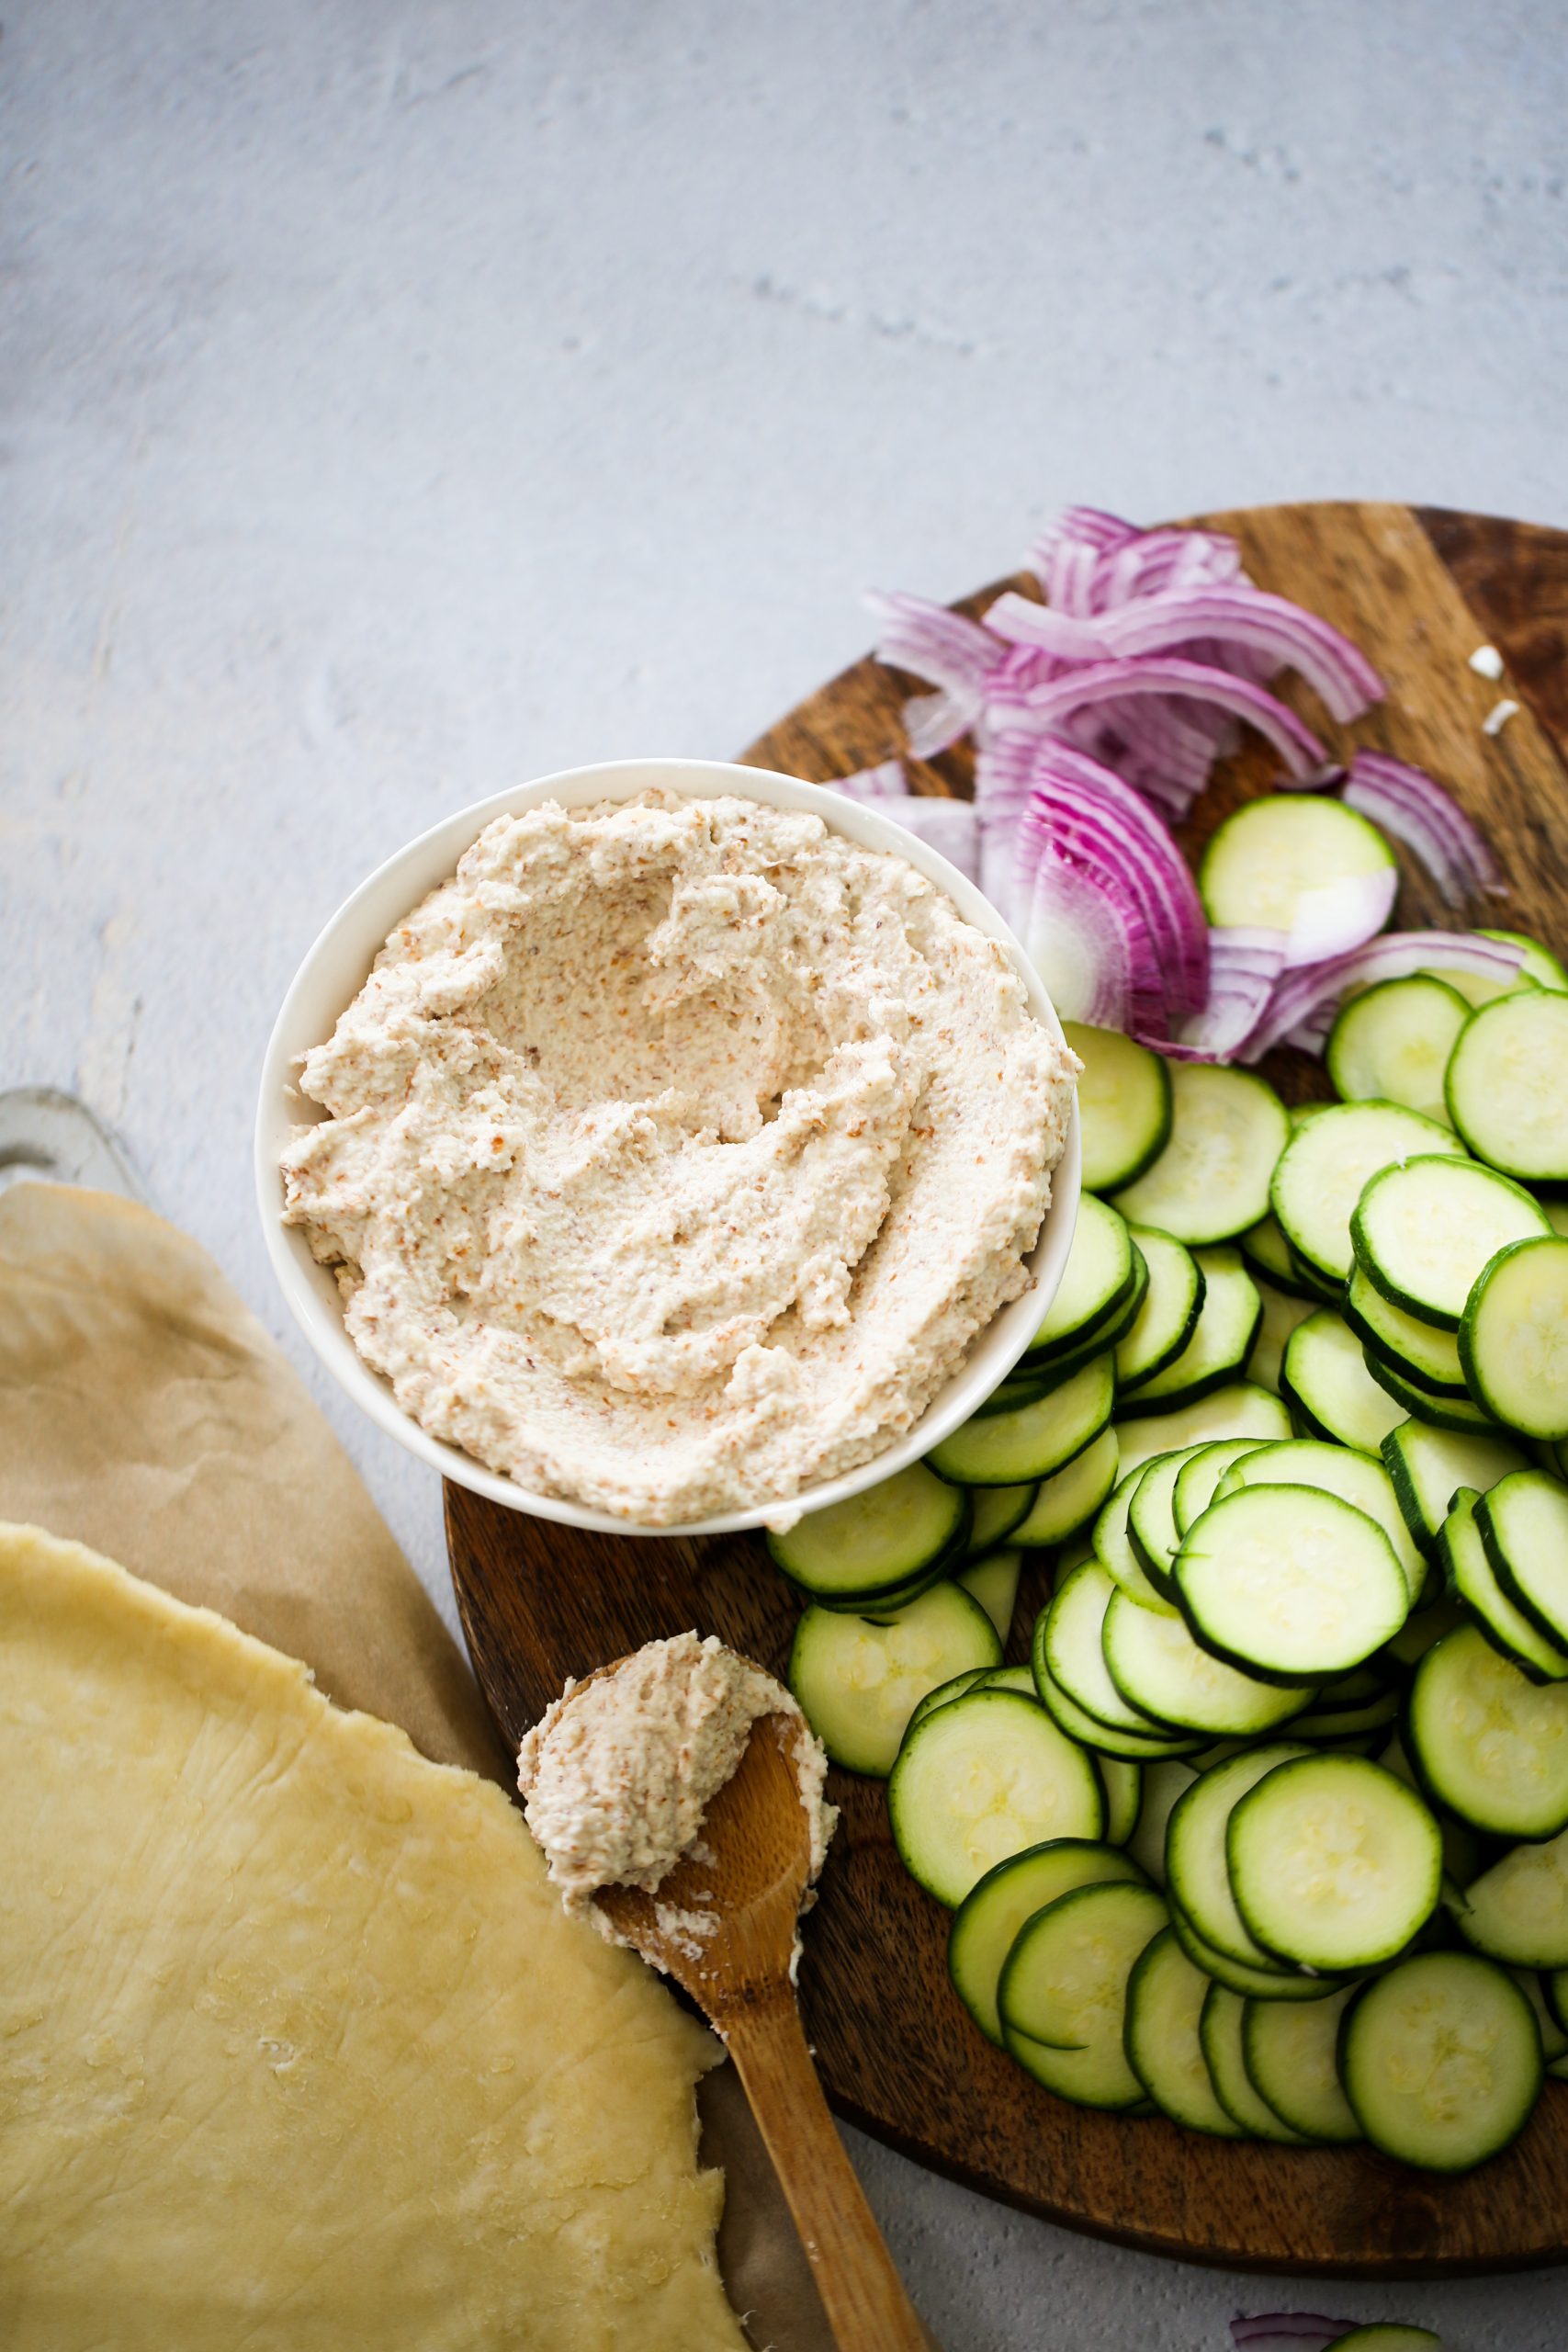 A bowl of creamy ricotta cheese on a wooden platter is surrounded by thinly sliced zucchini and red onion, perfect for assembling a savory zucchini galette. A wooden spoon with a small amount of cheese rests nearby on a light, textured surface. A rolled-out dough lies next to the platter, partially visible on parchment paper.